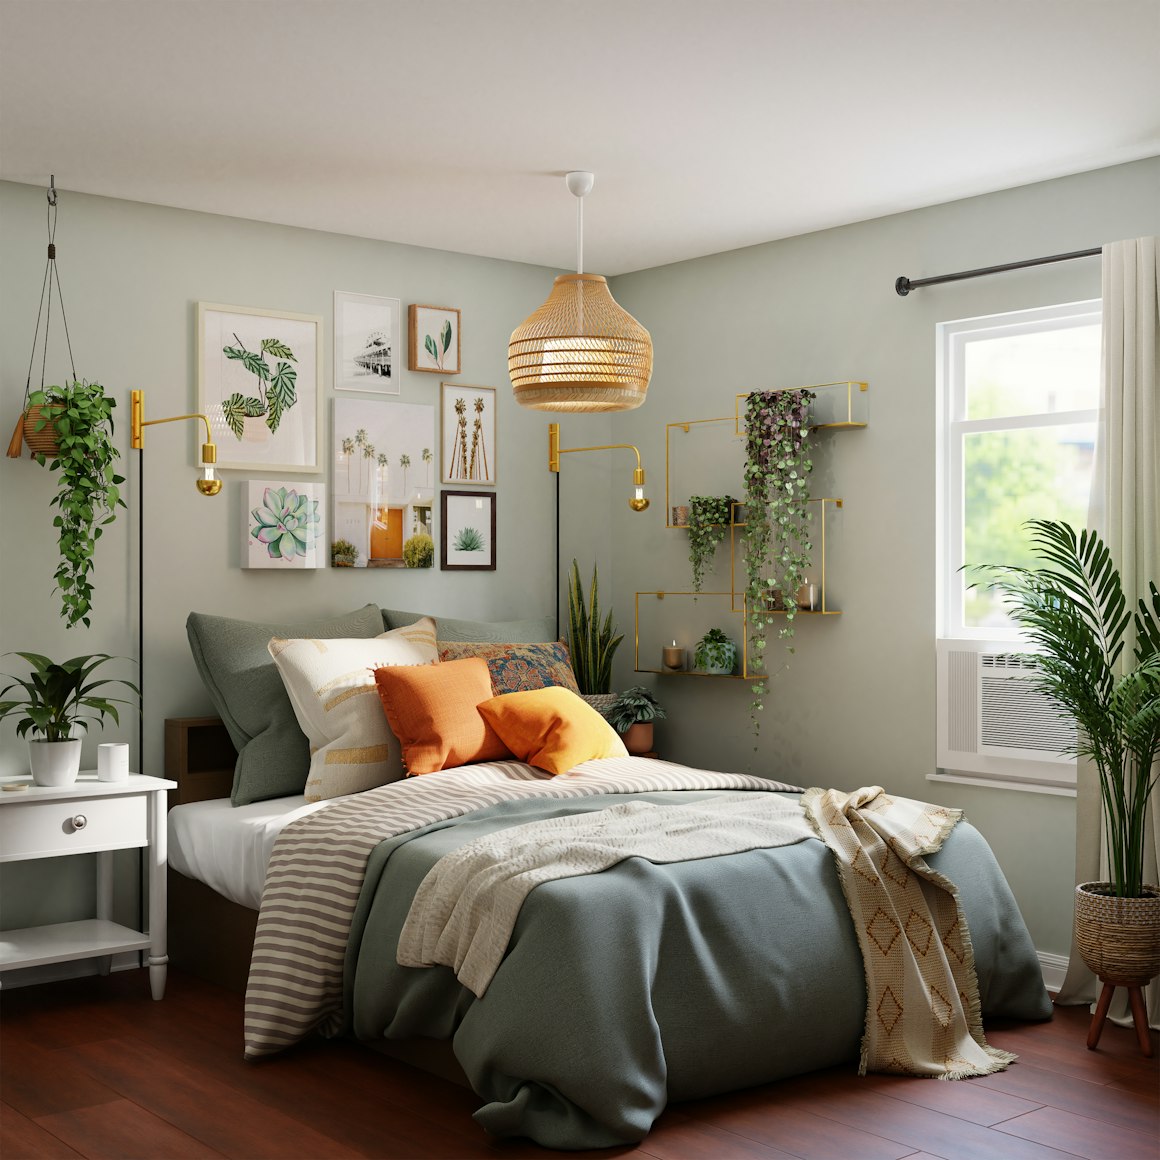 neutral colored bedroom with plants and overhead lighting pendants - photo from Unsplash